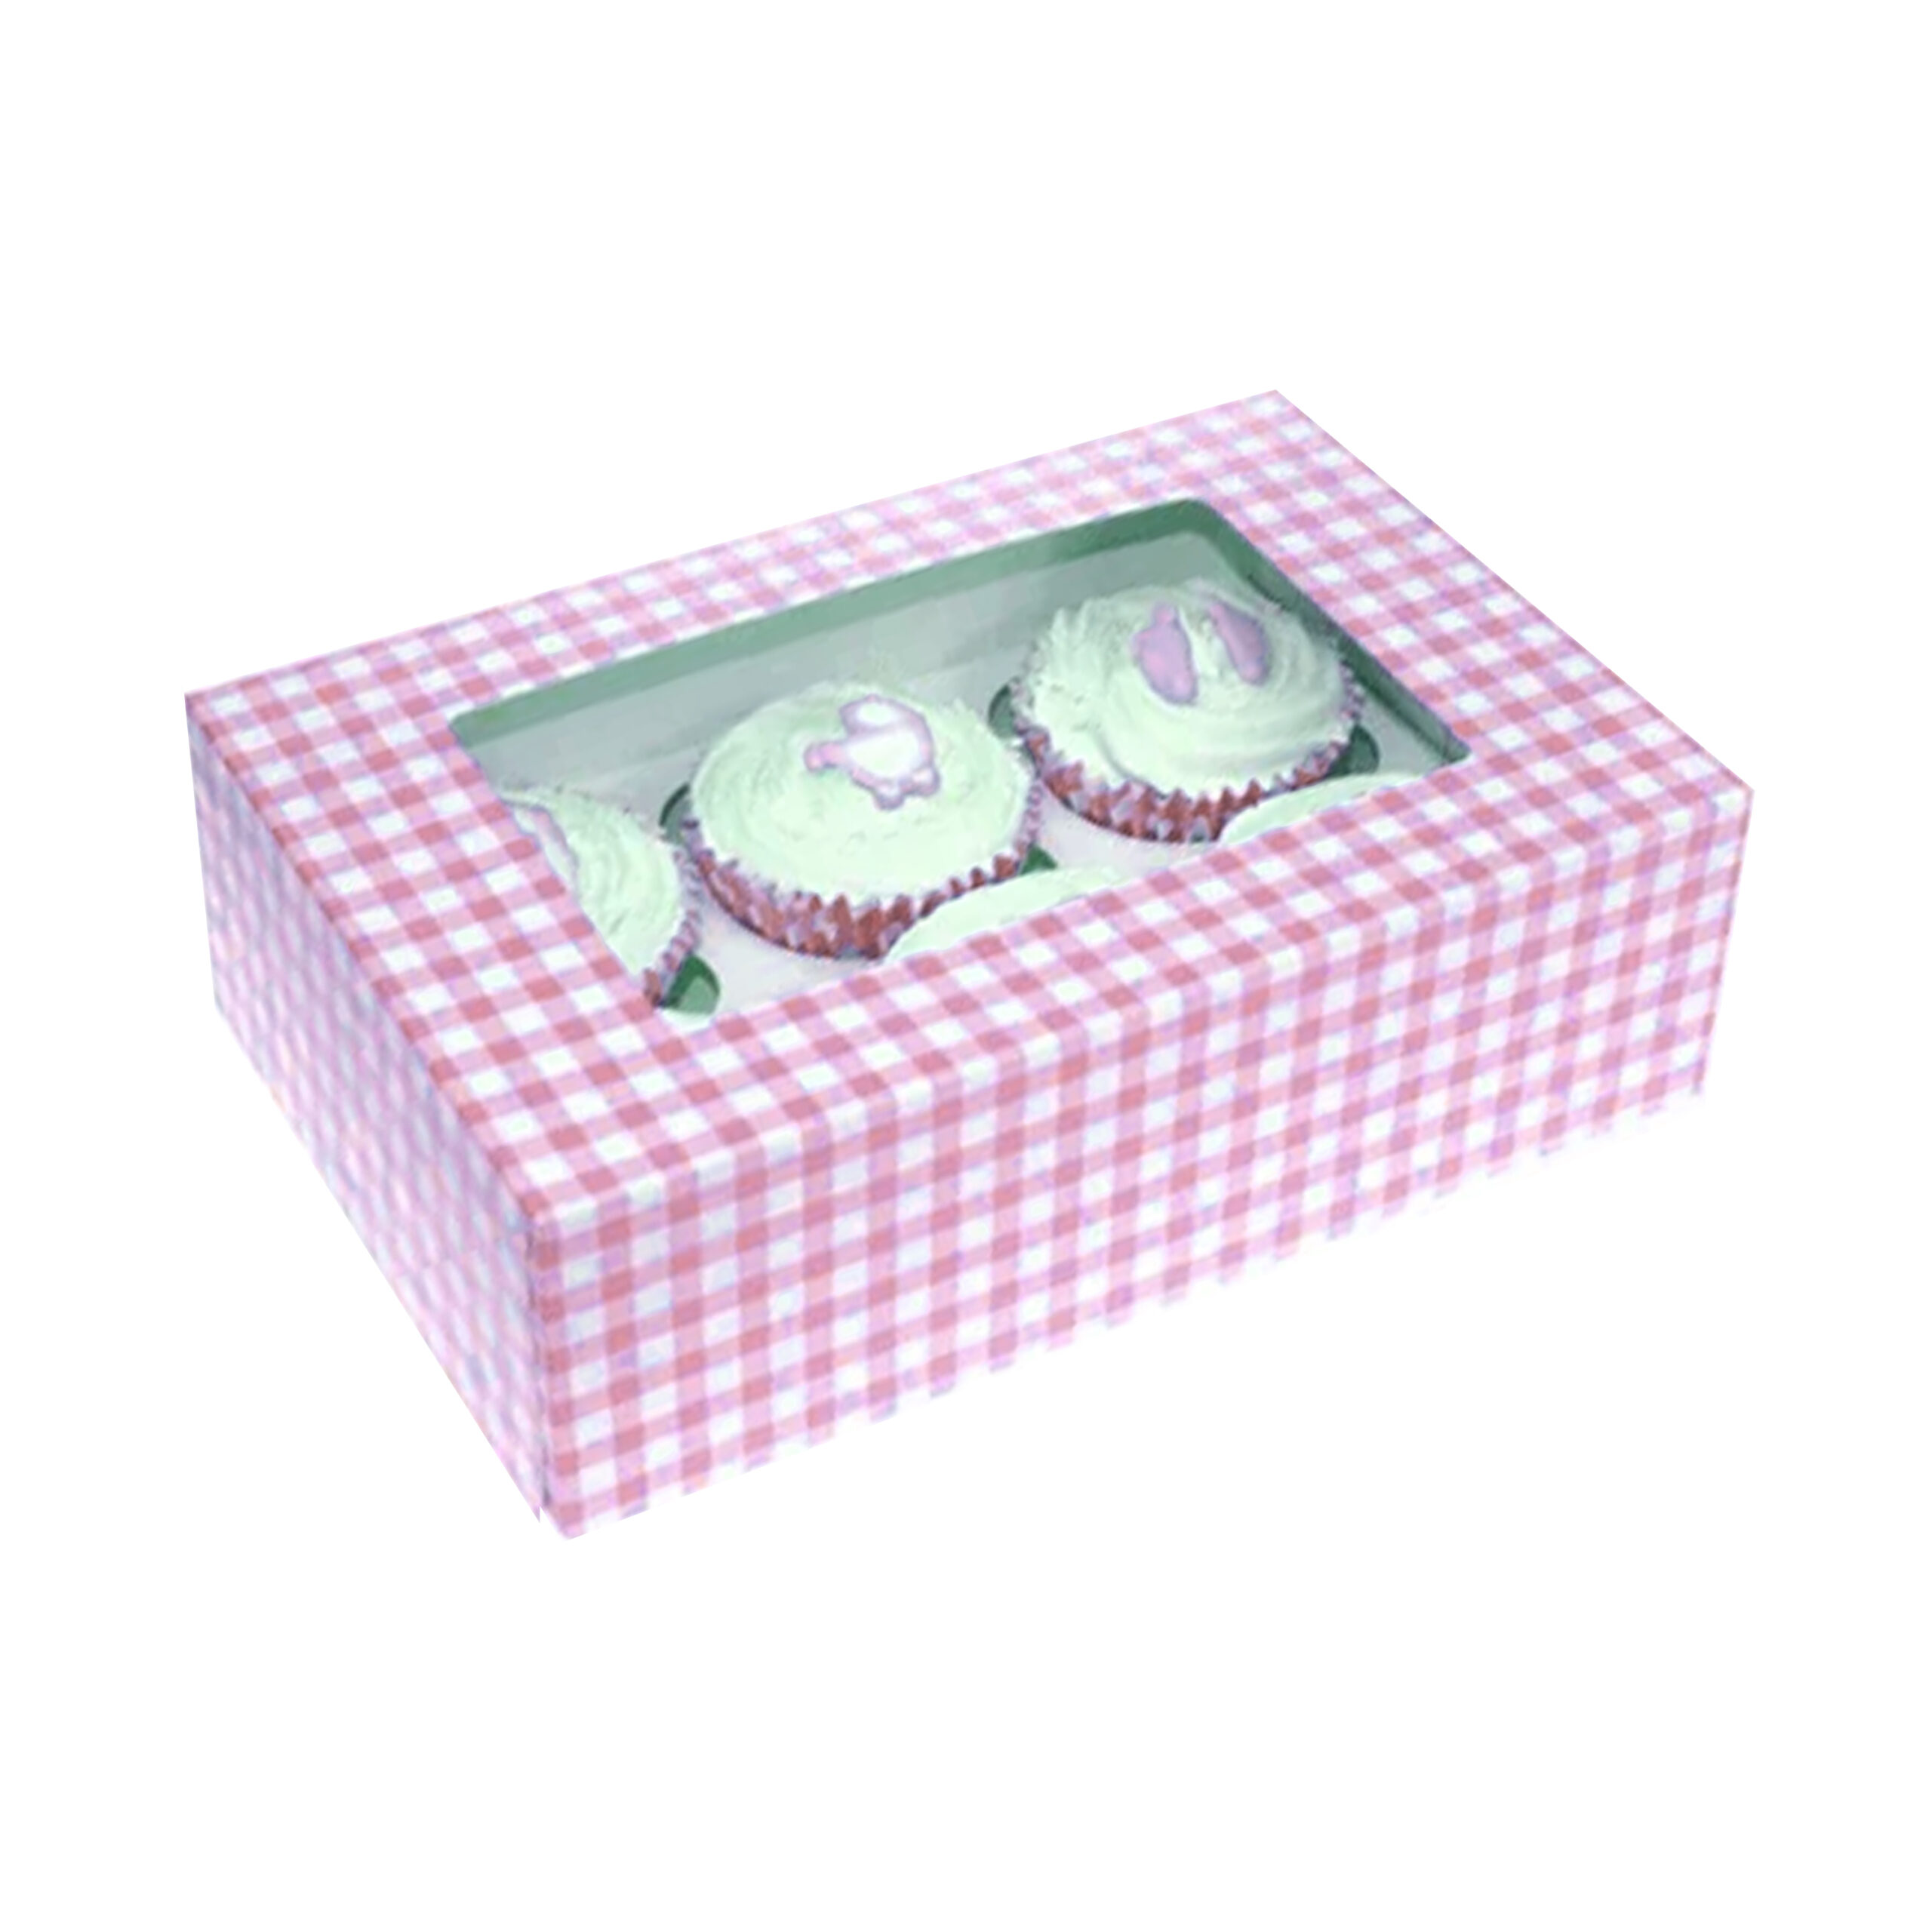 CUPCAKE BOX
PINK WITH INSERT 
6cup